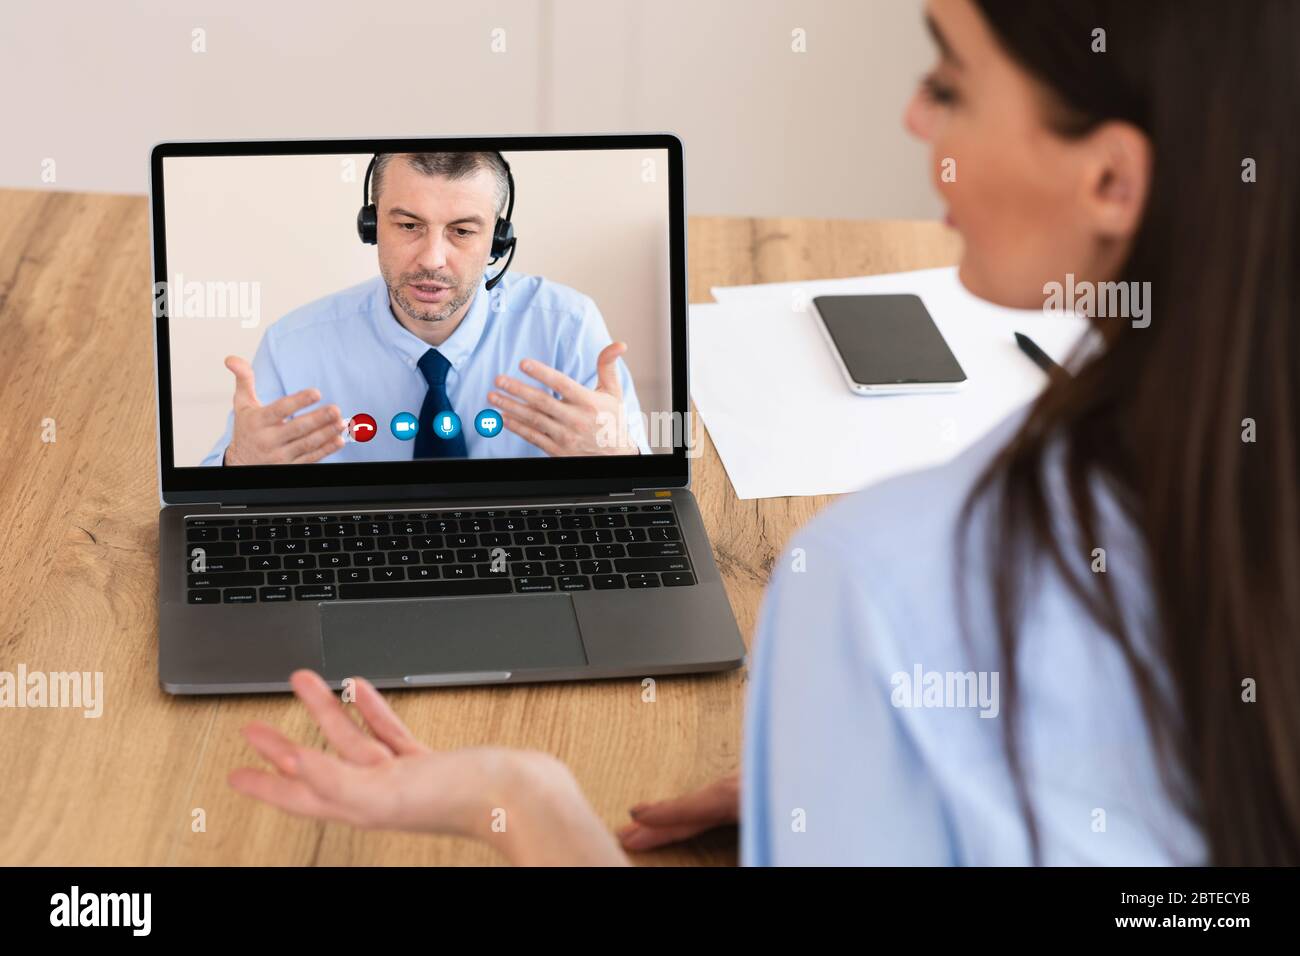 Workers having discussion during video call at home Stock Photo